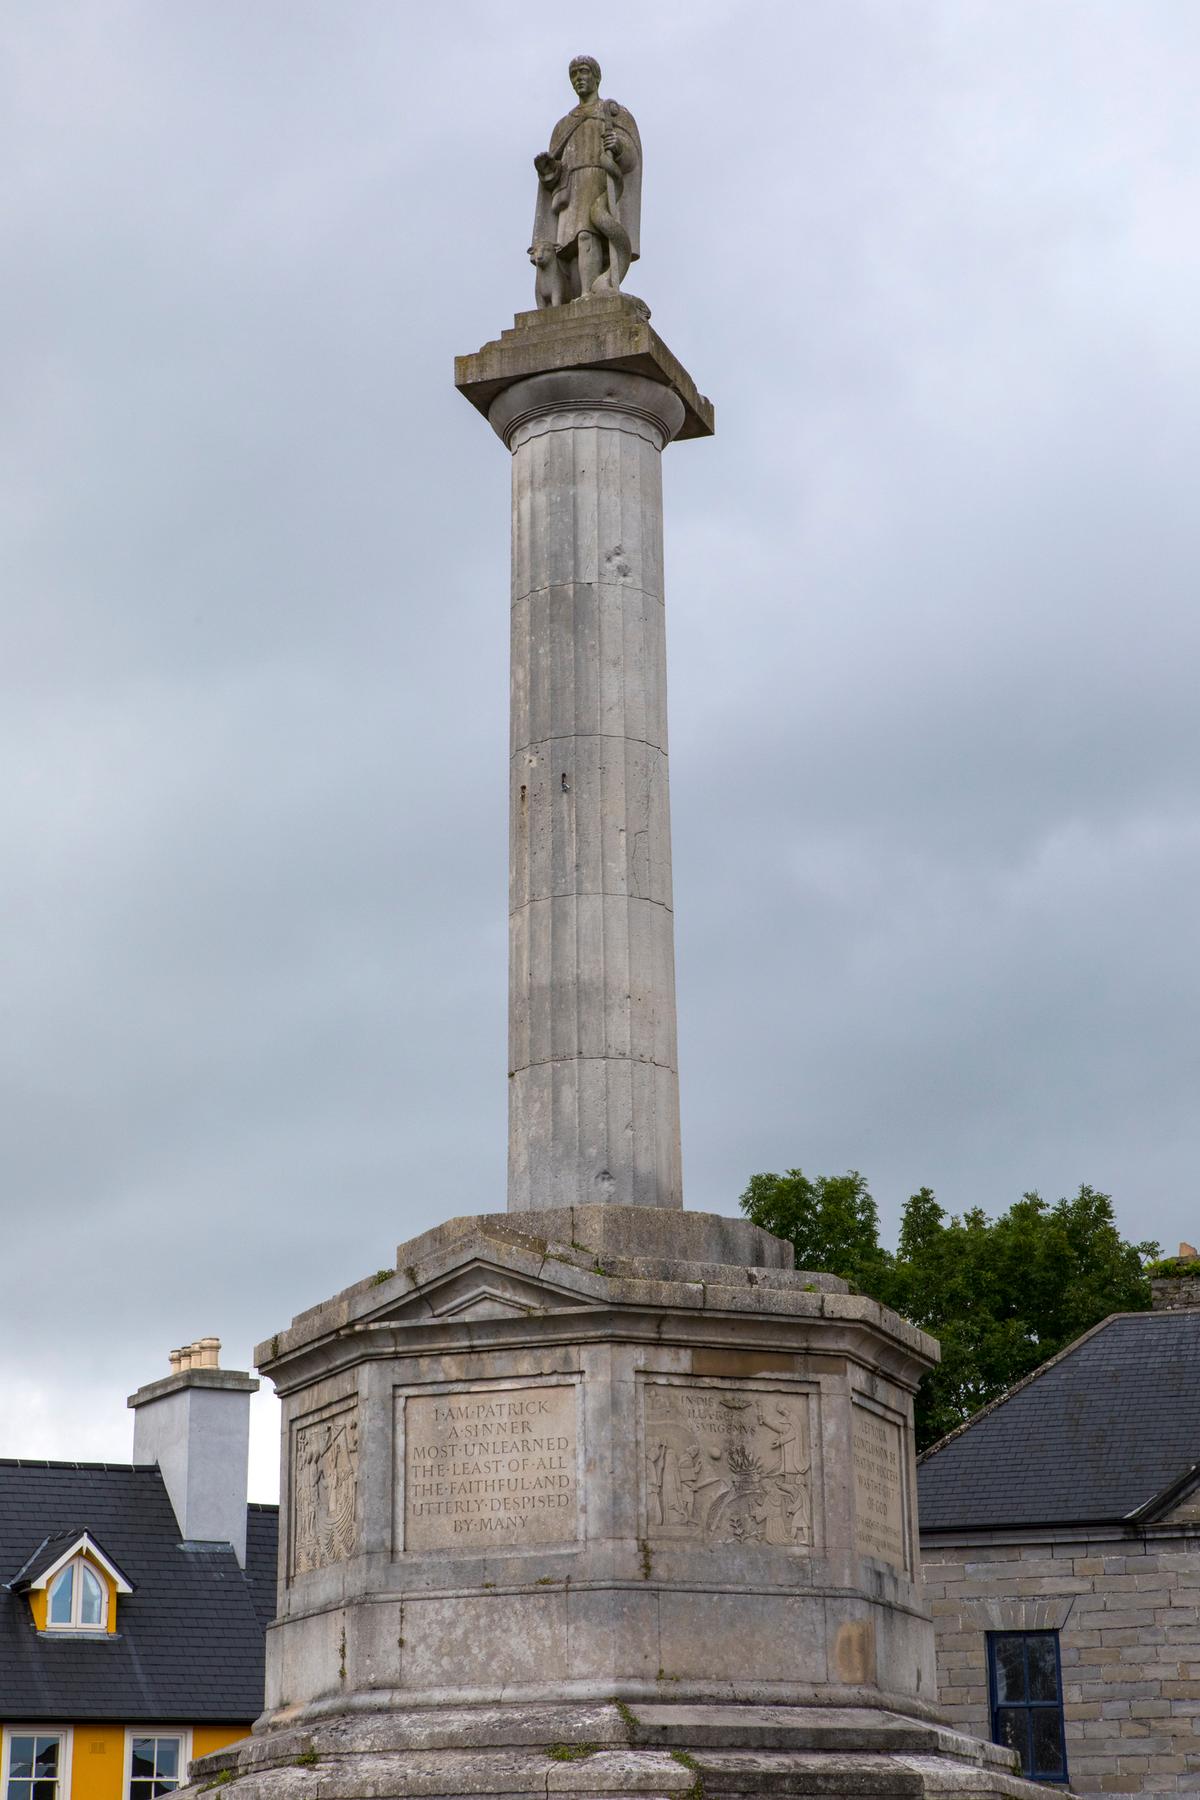 A view of the Octagon with its column and the statue of St. Patrick, in the town of Westport, in County Mayo Ireland.